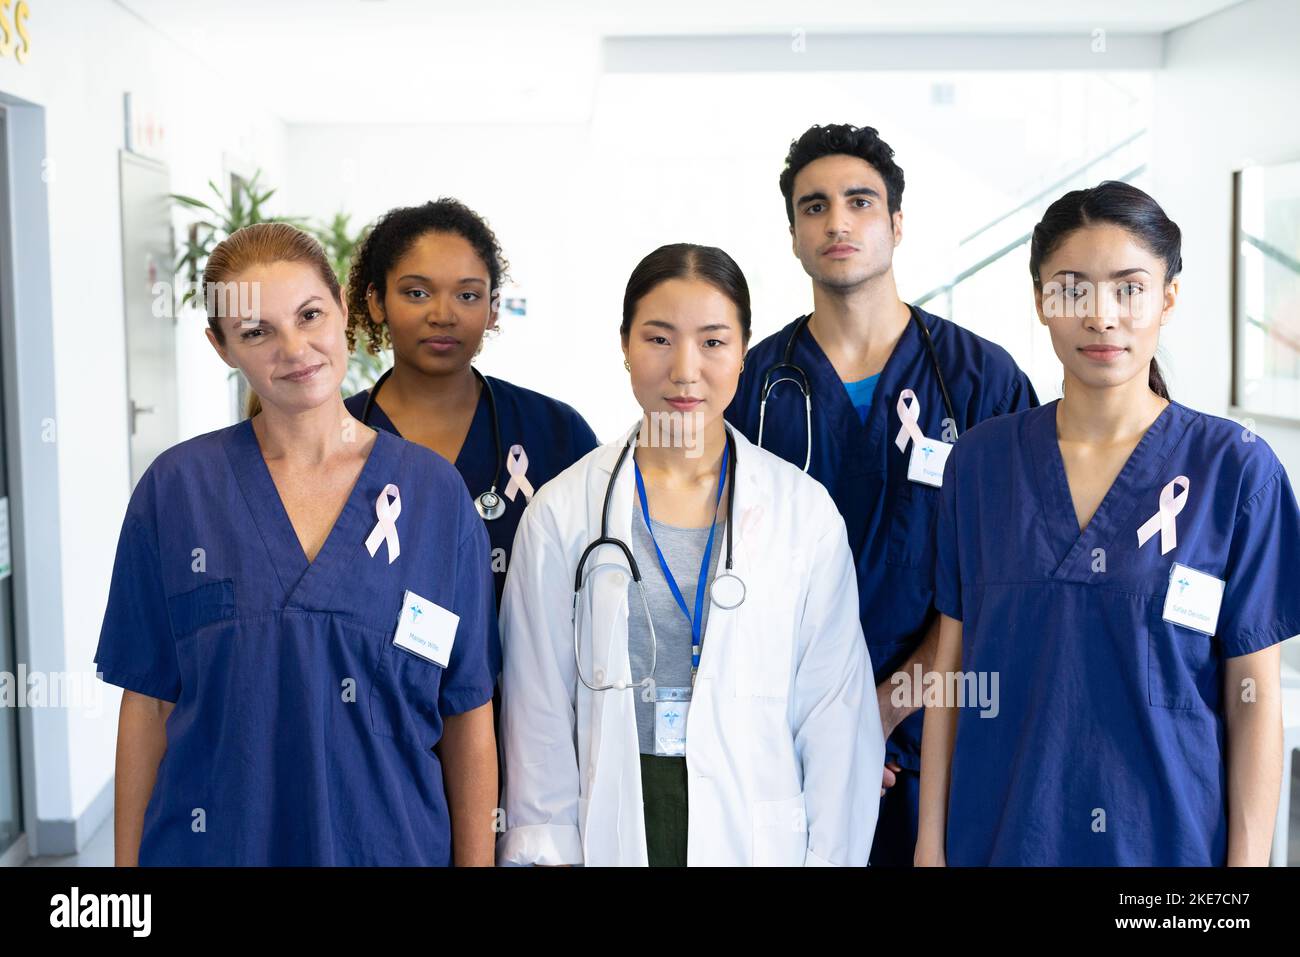 Portrait of diverse group of healthcare workers wearing cancer ribbons standing in hospital corridor Stock Photo